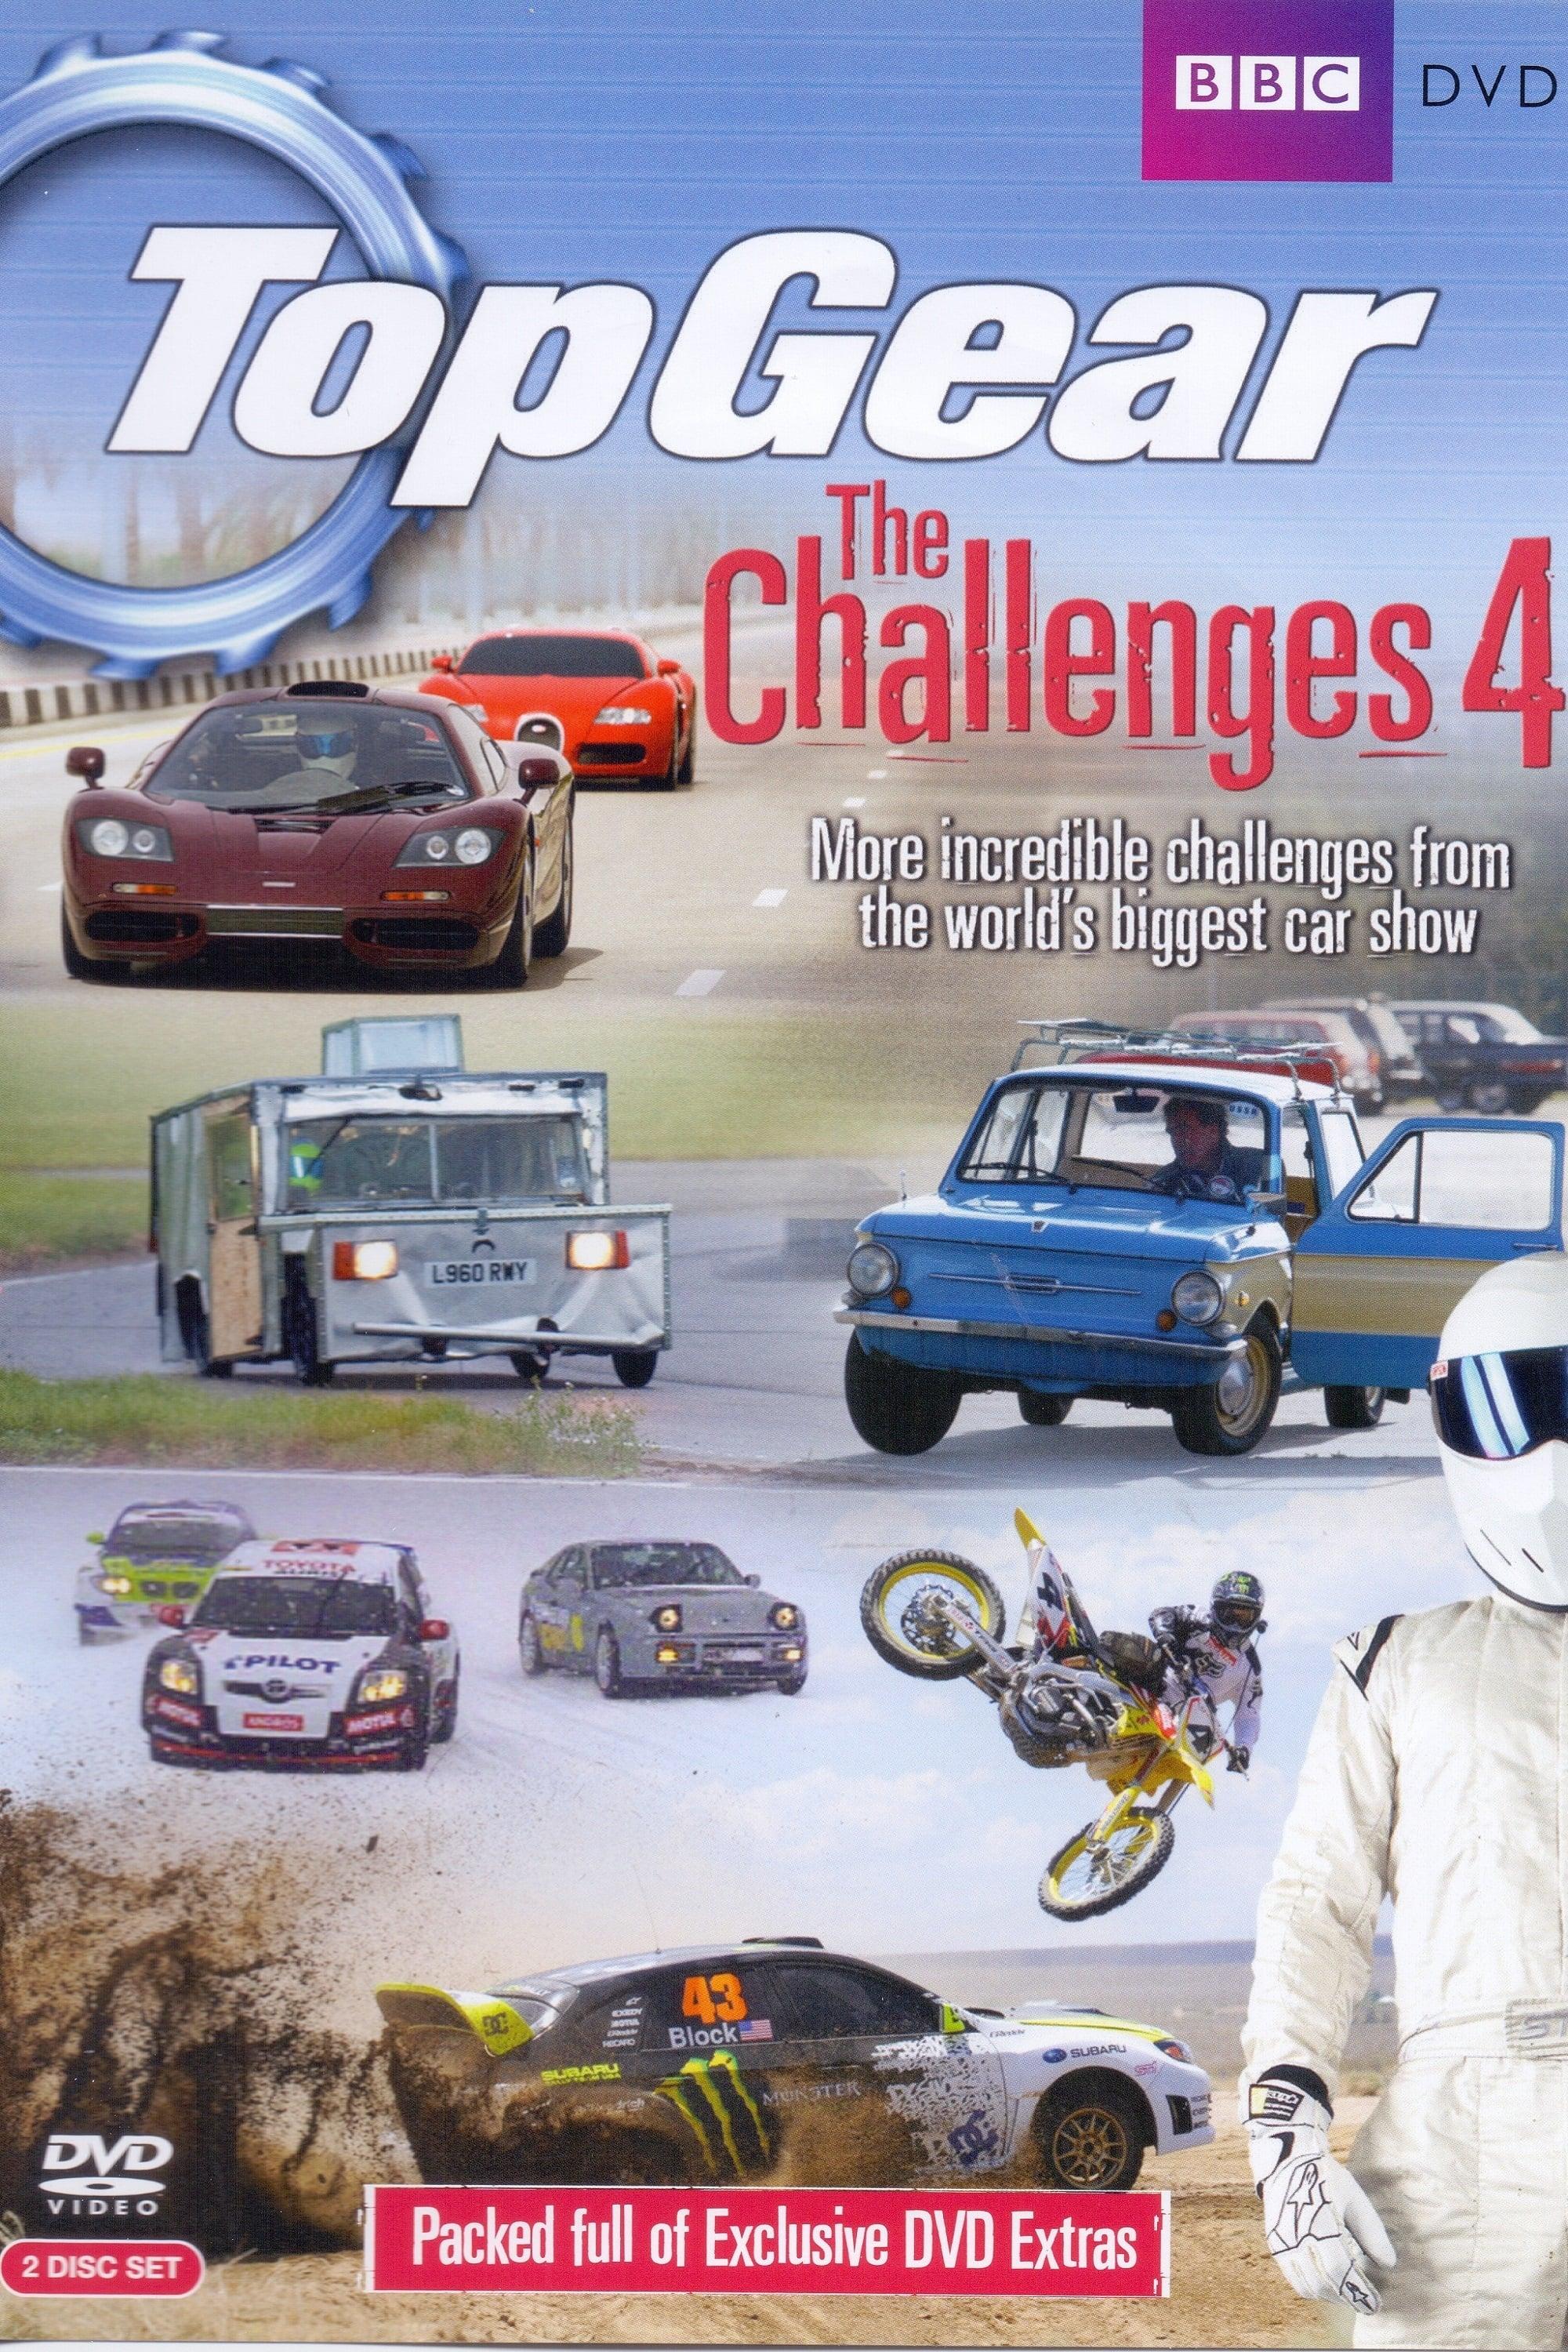 Top Gear: The Challenges 4 poster